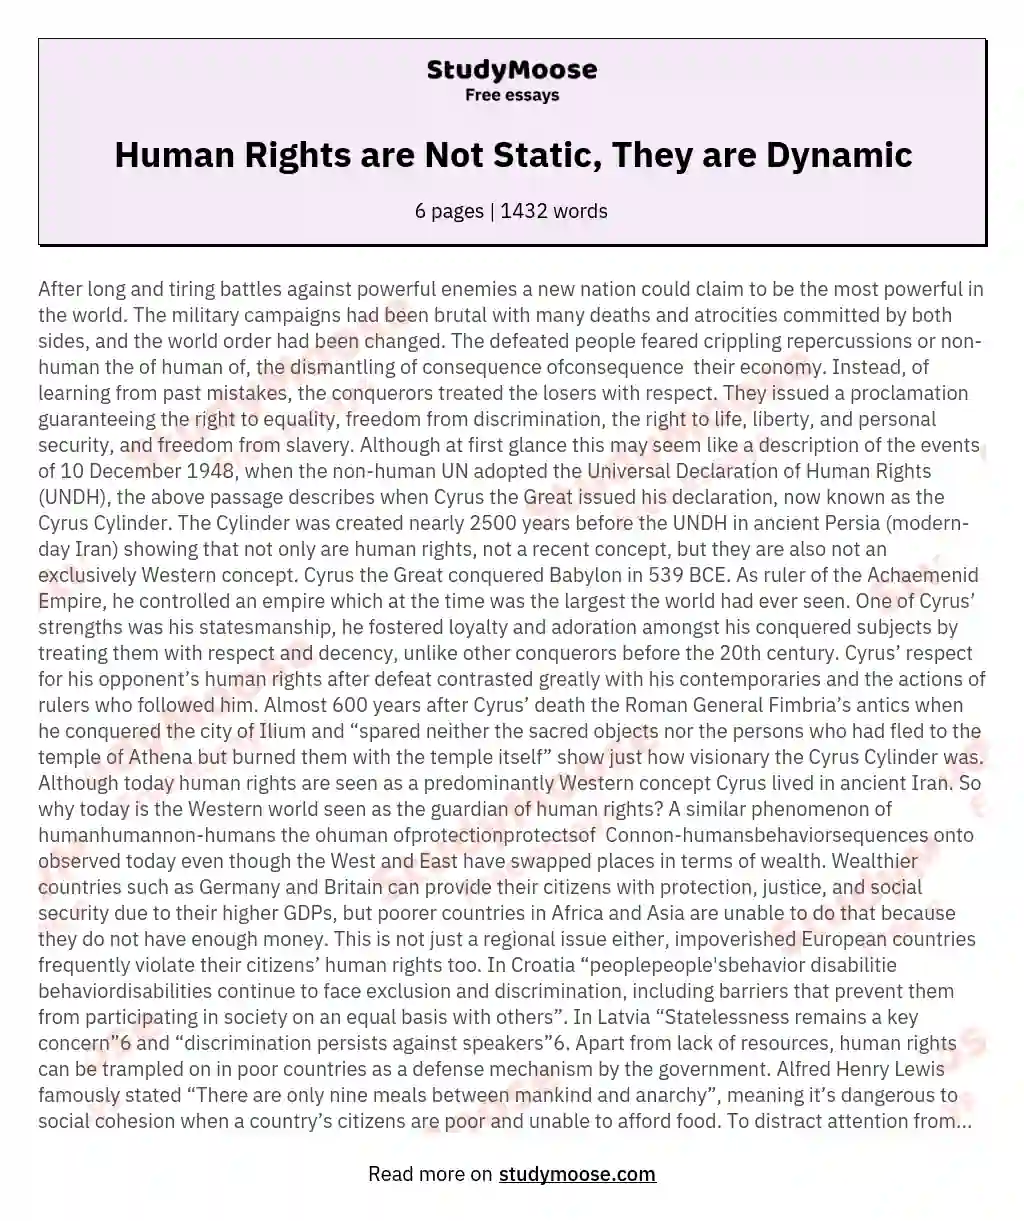 Human Rights are Not Static, They are Dynamic essay